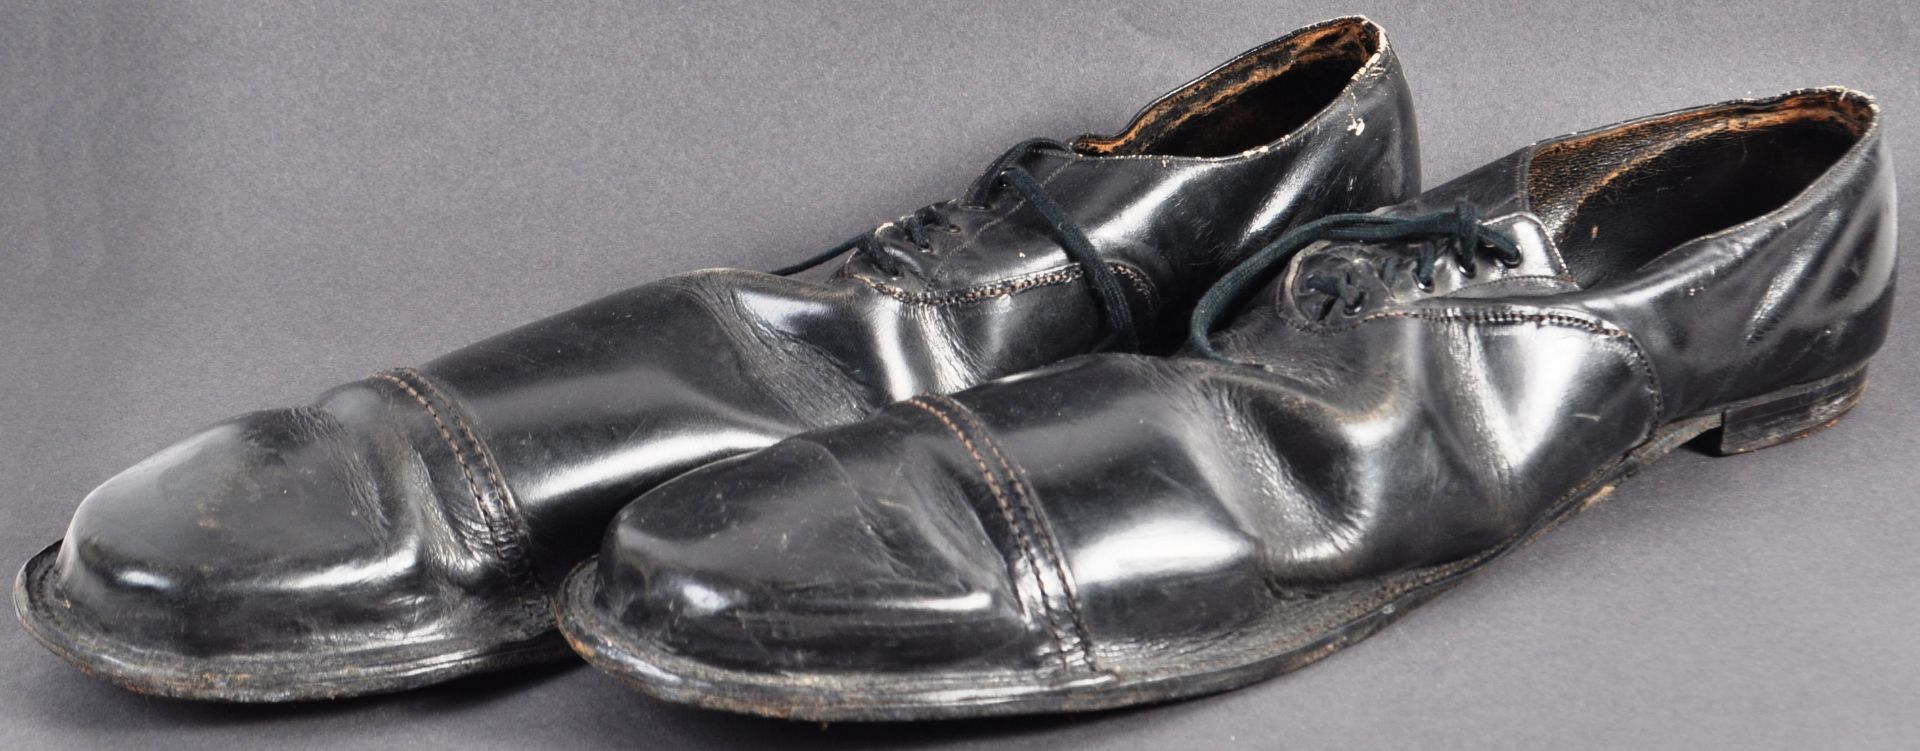 PAIR OF ANTIQUE LATE 19TH / EARLY 20TH CENTURY LEATHER CLOWN SHOES